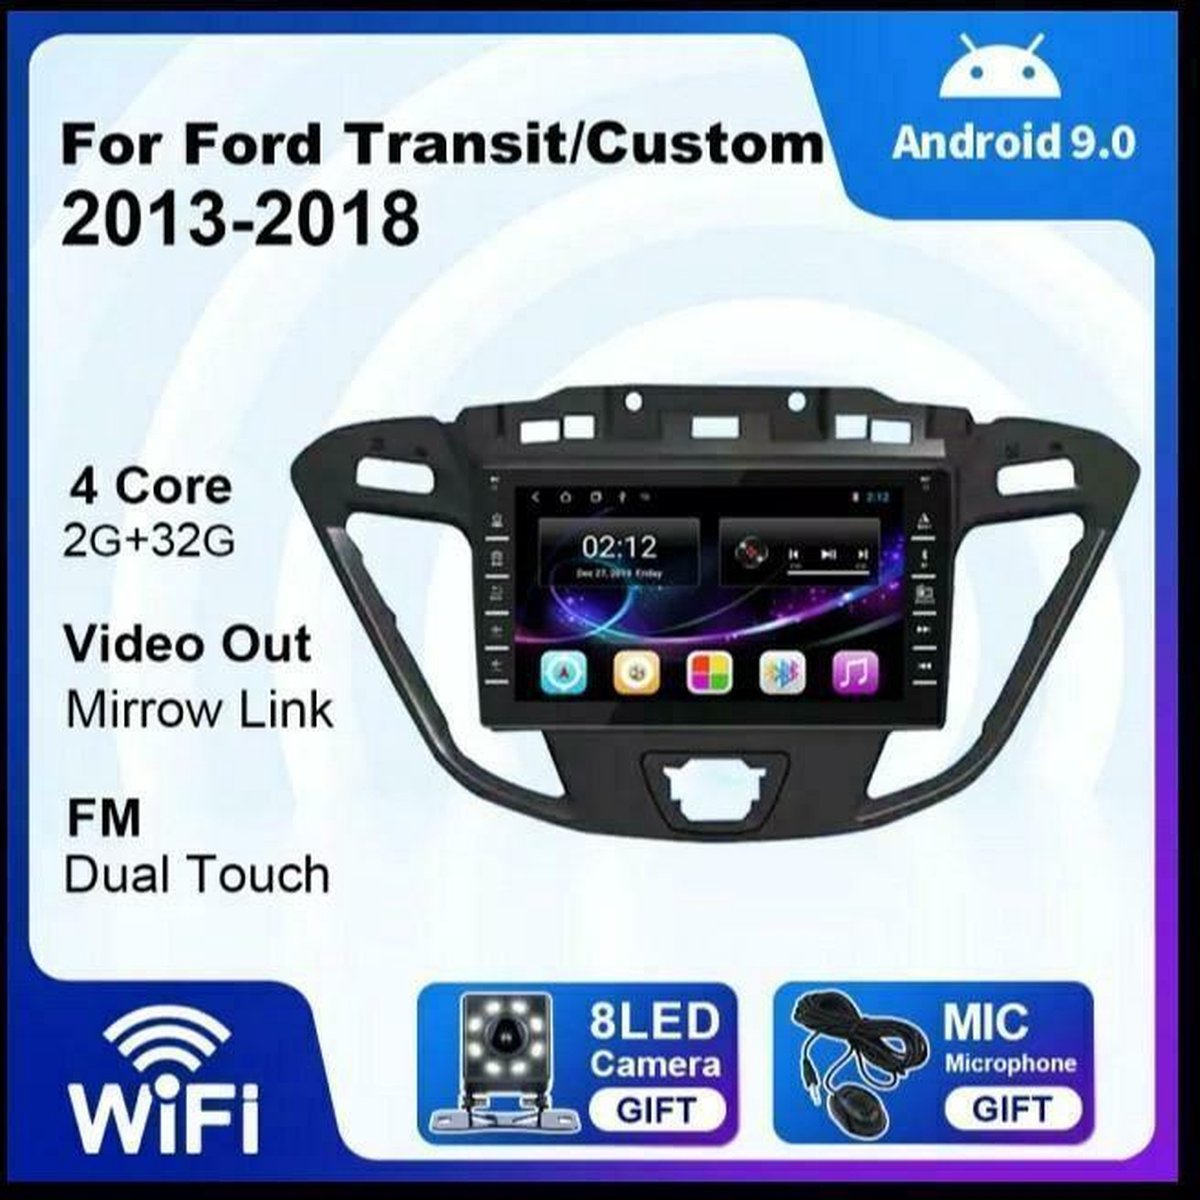 ford custom android 2g/32g wifi 2013/2018